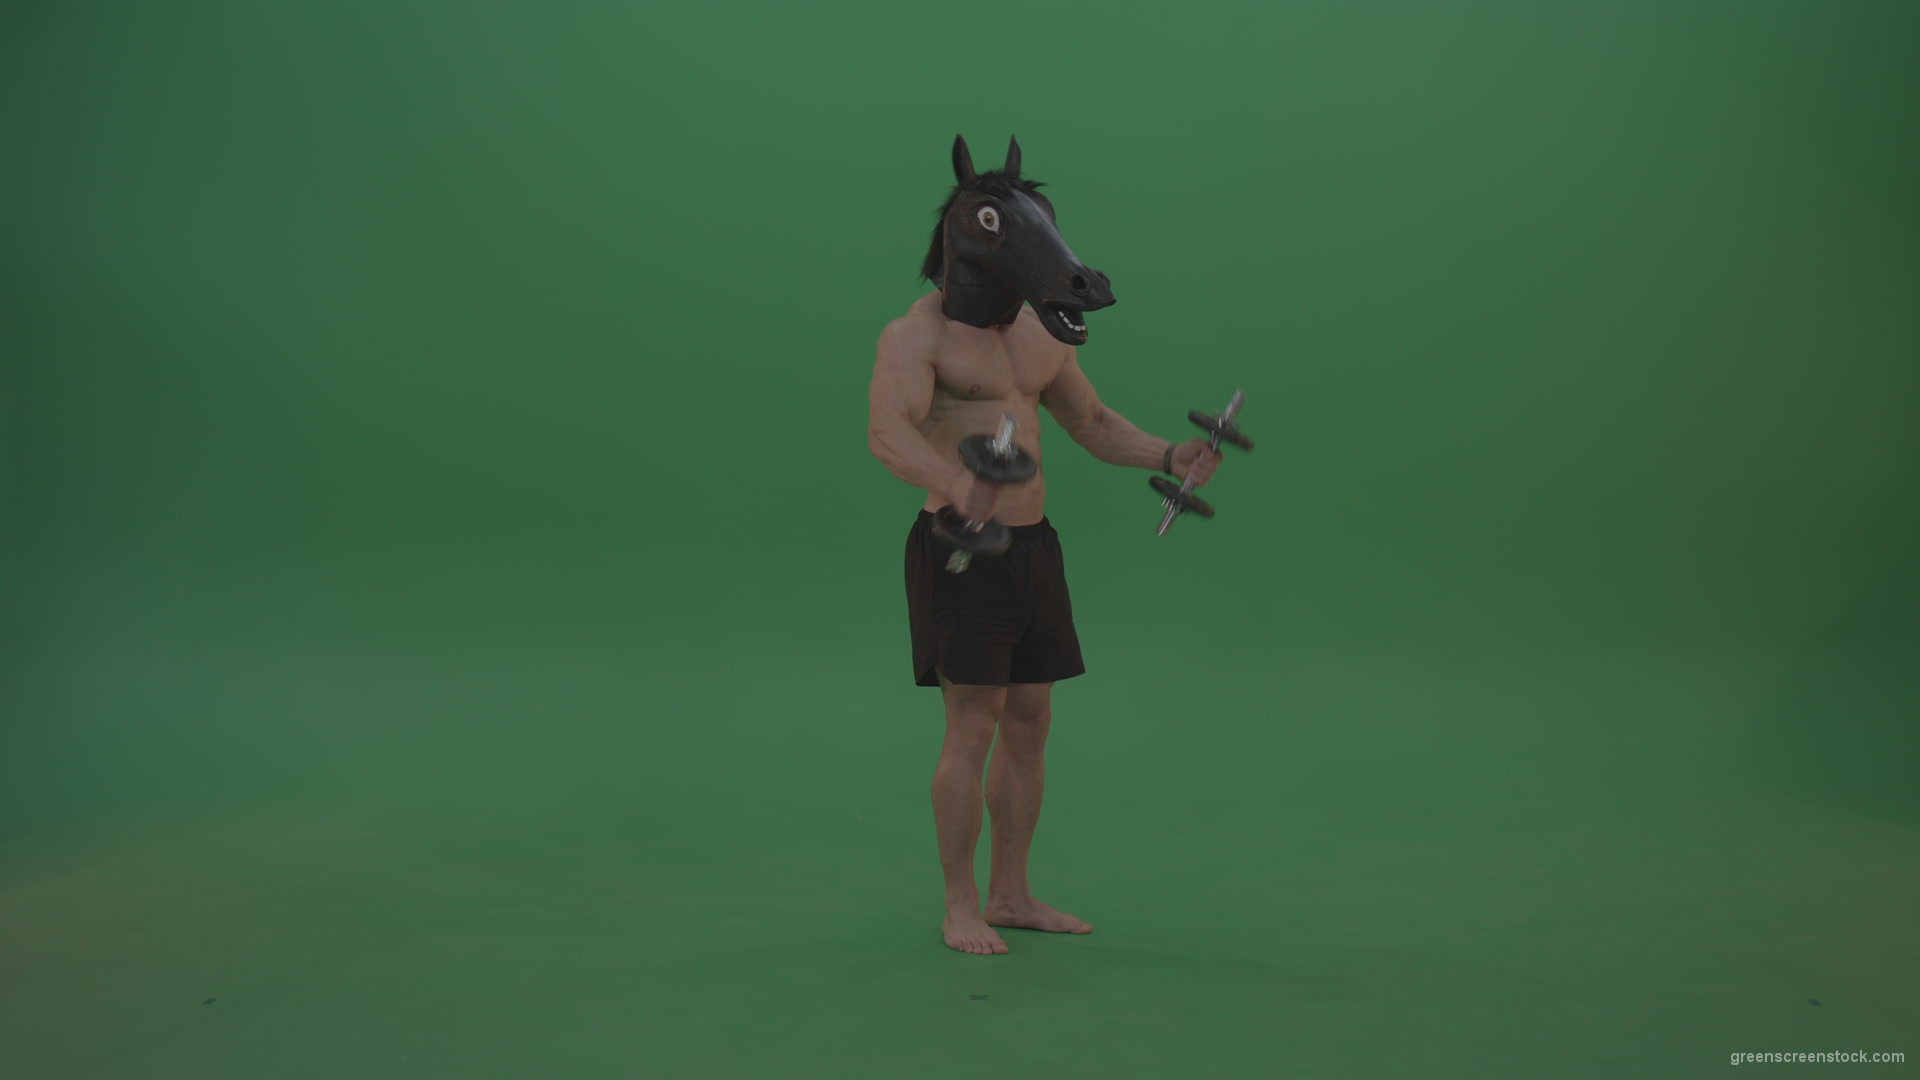 Ripped-man-with-horse-head-lifts-dumbells-over-chromakey-background_006 Green Screen Stock